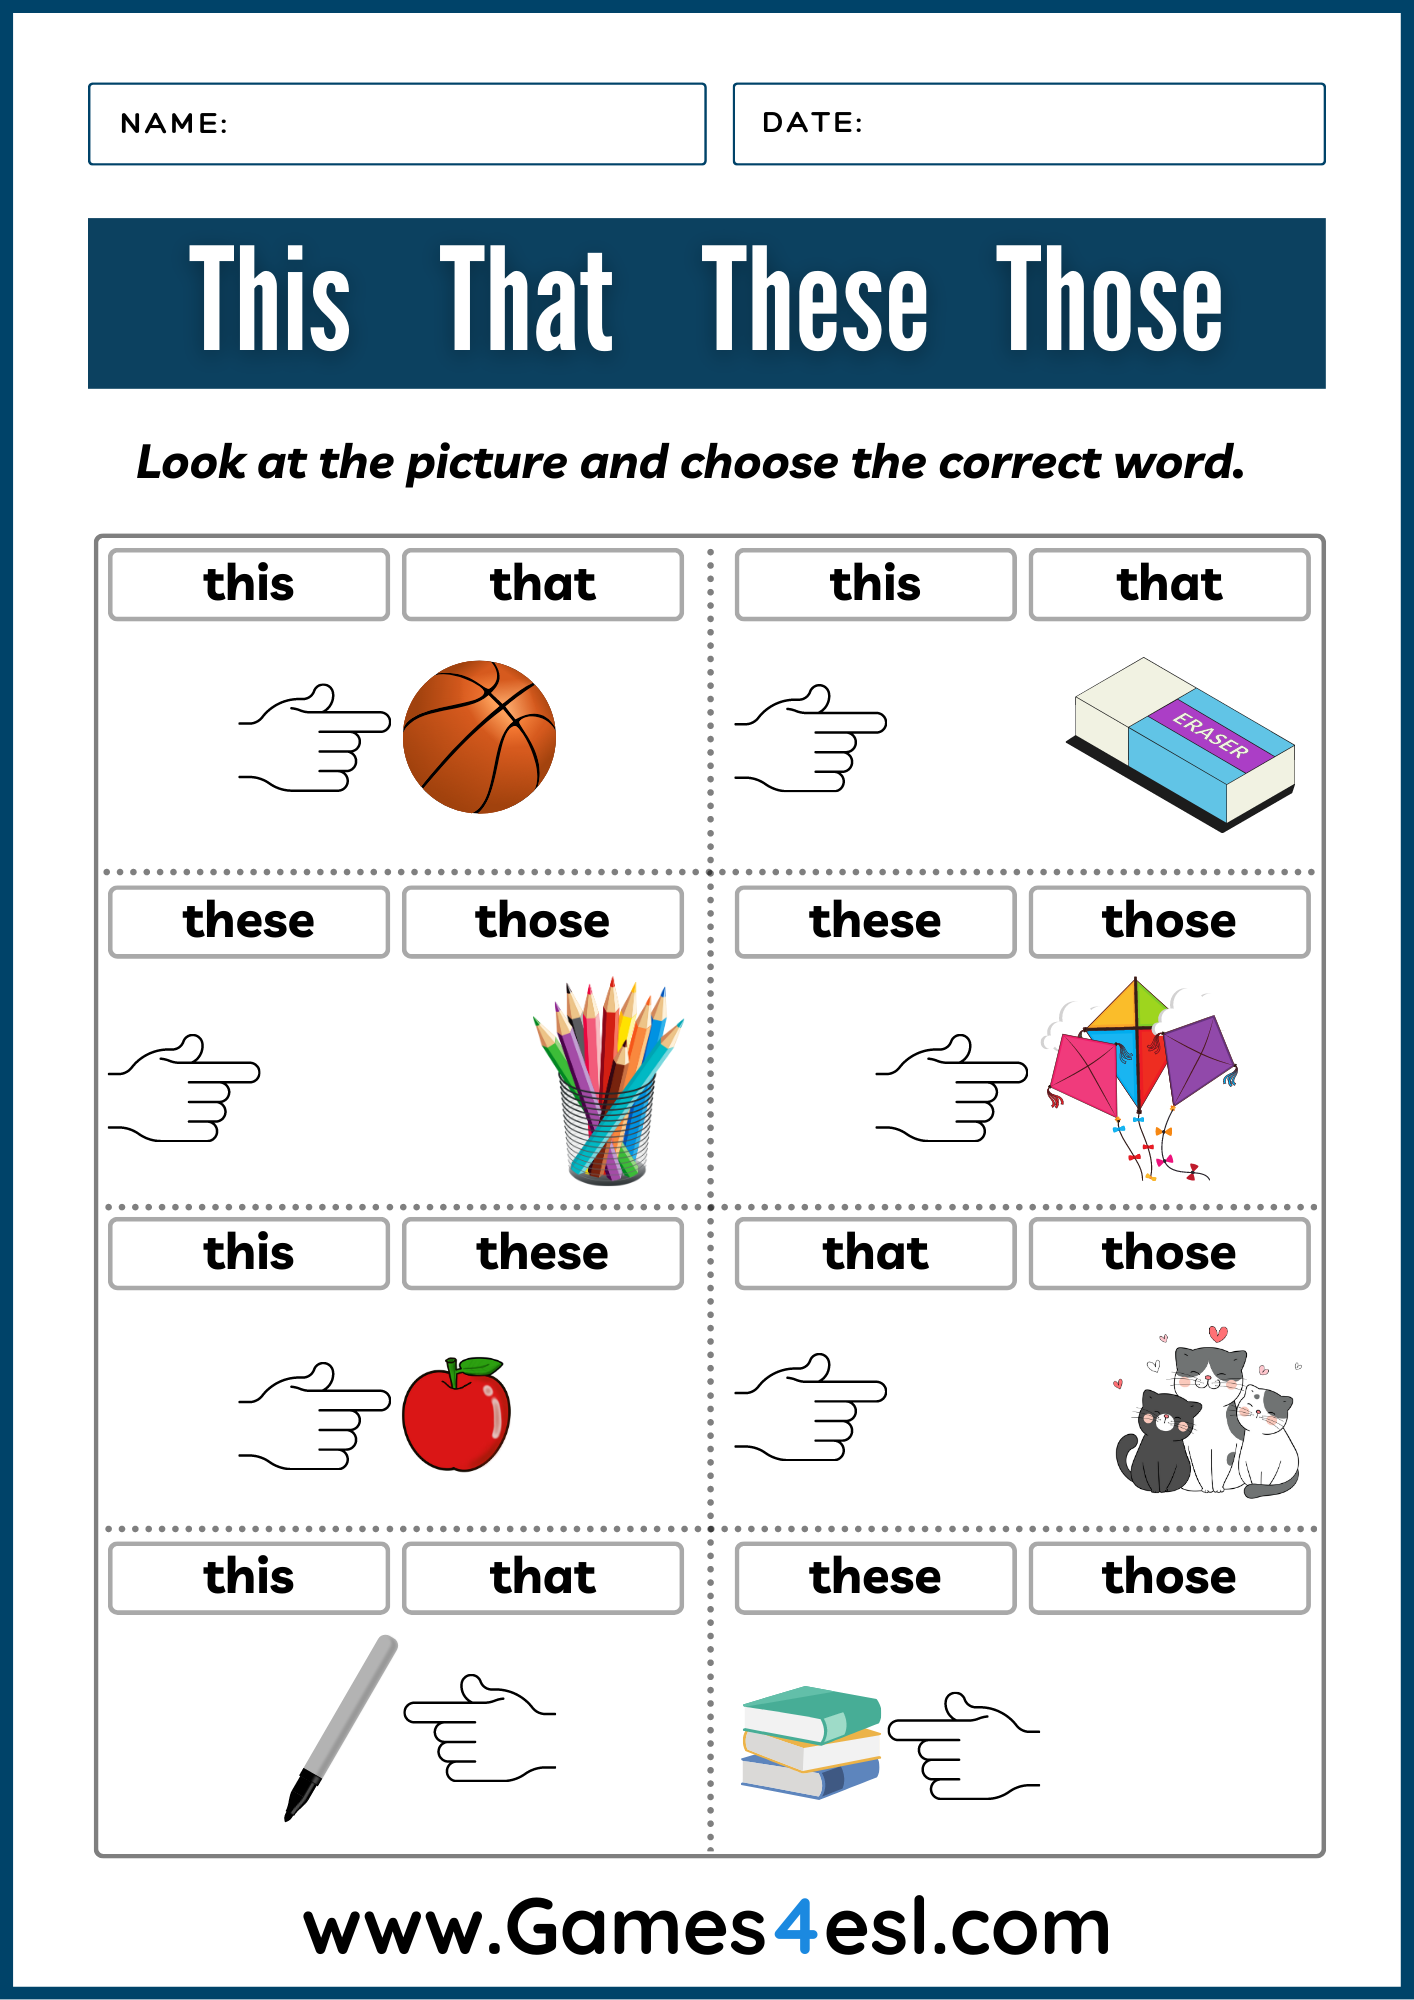 This That These Those Worksheets Printable Demonstrative Pronoun Exercises Games4esl